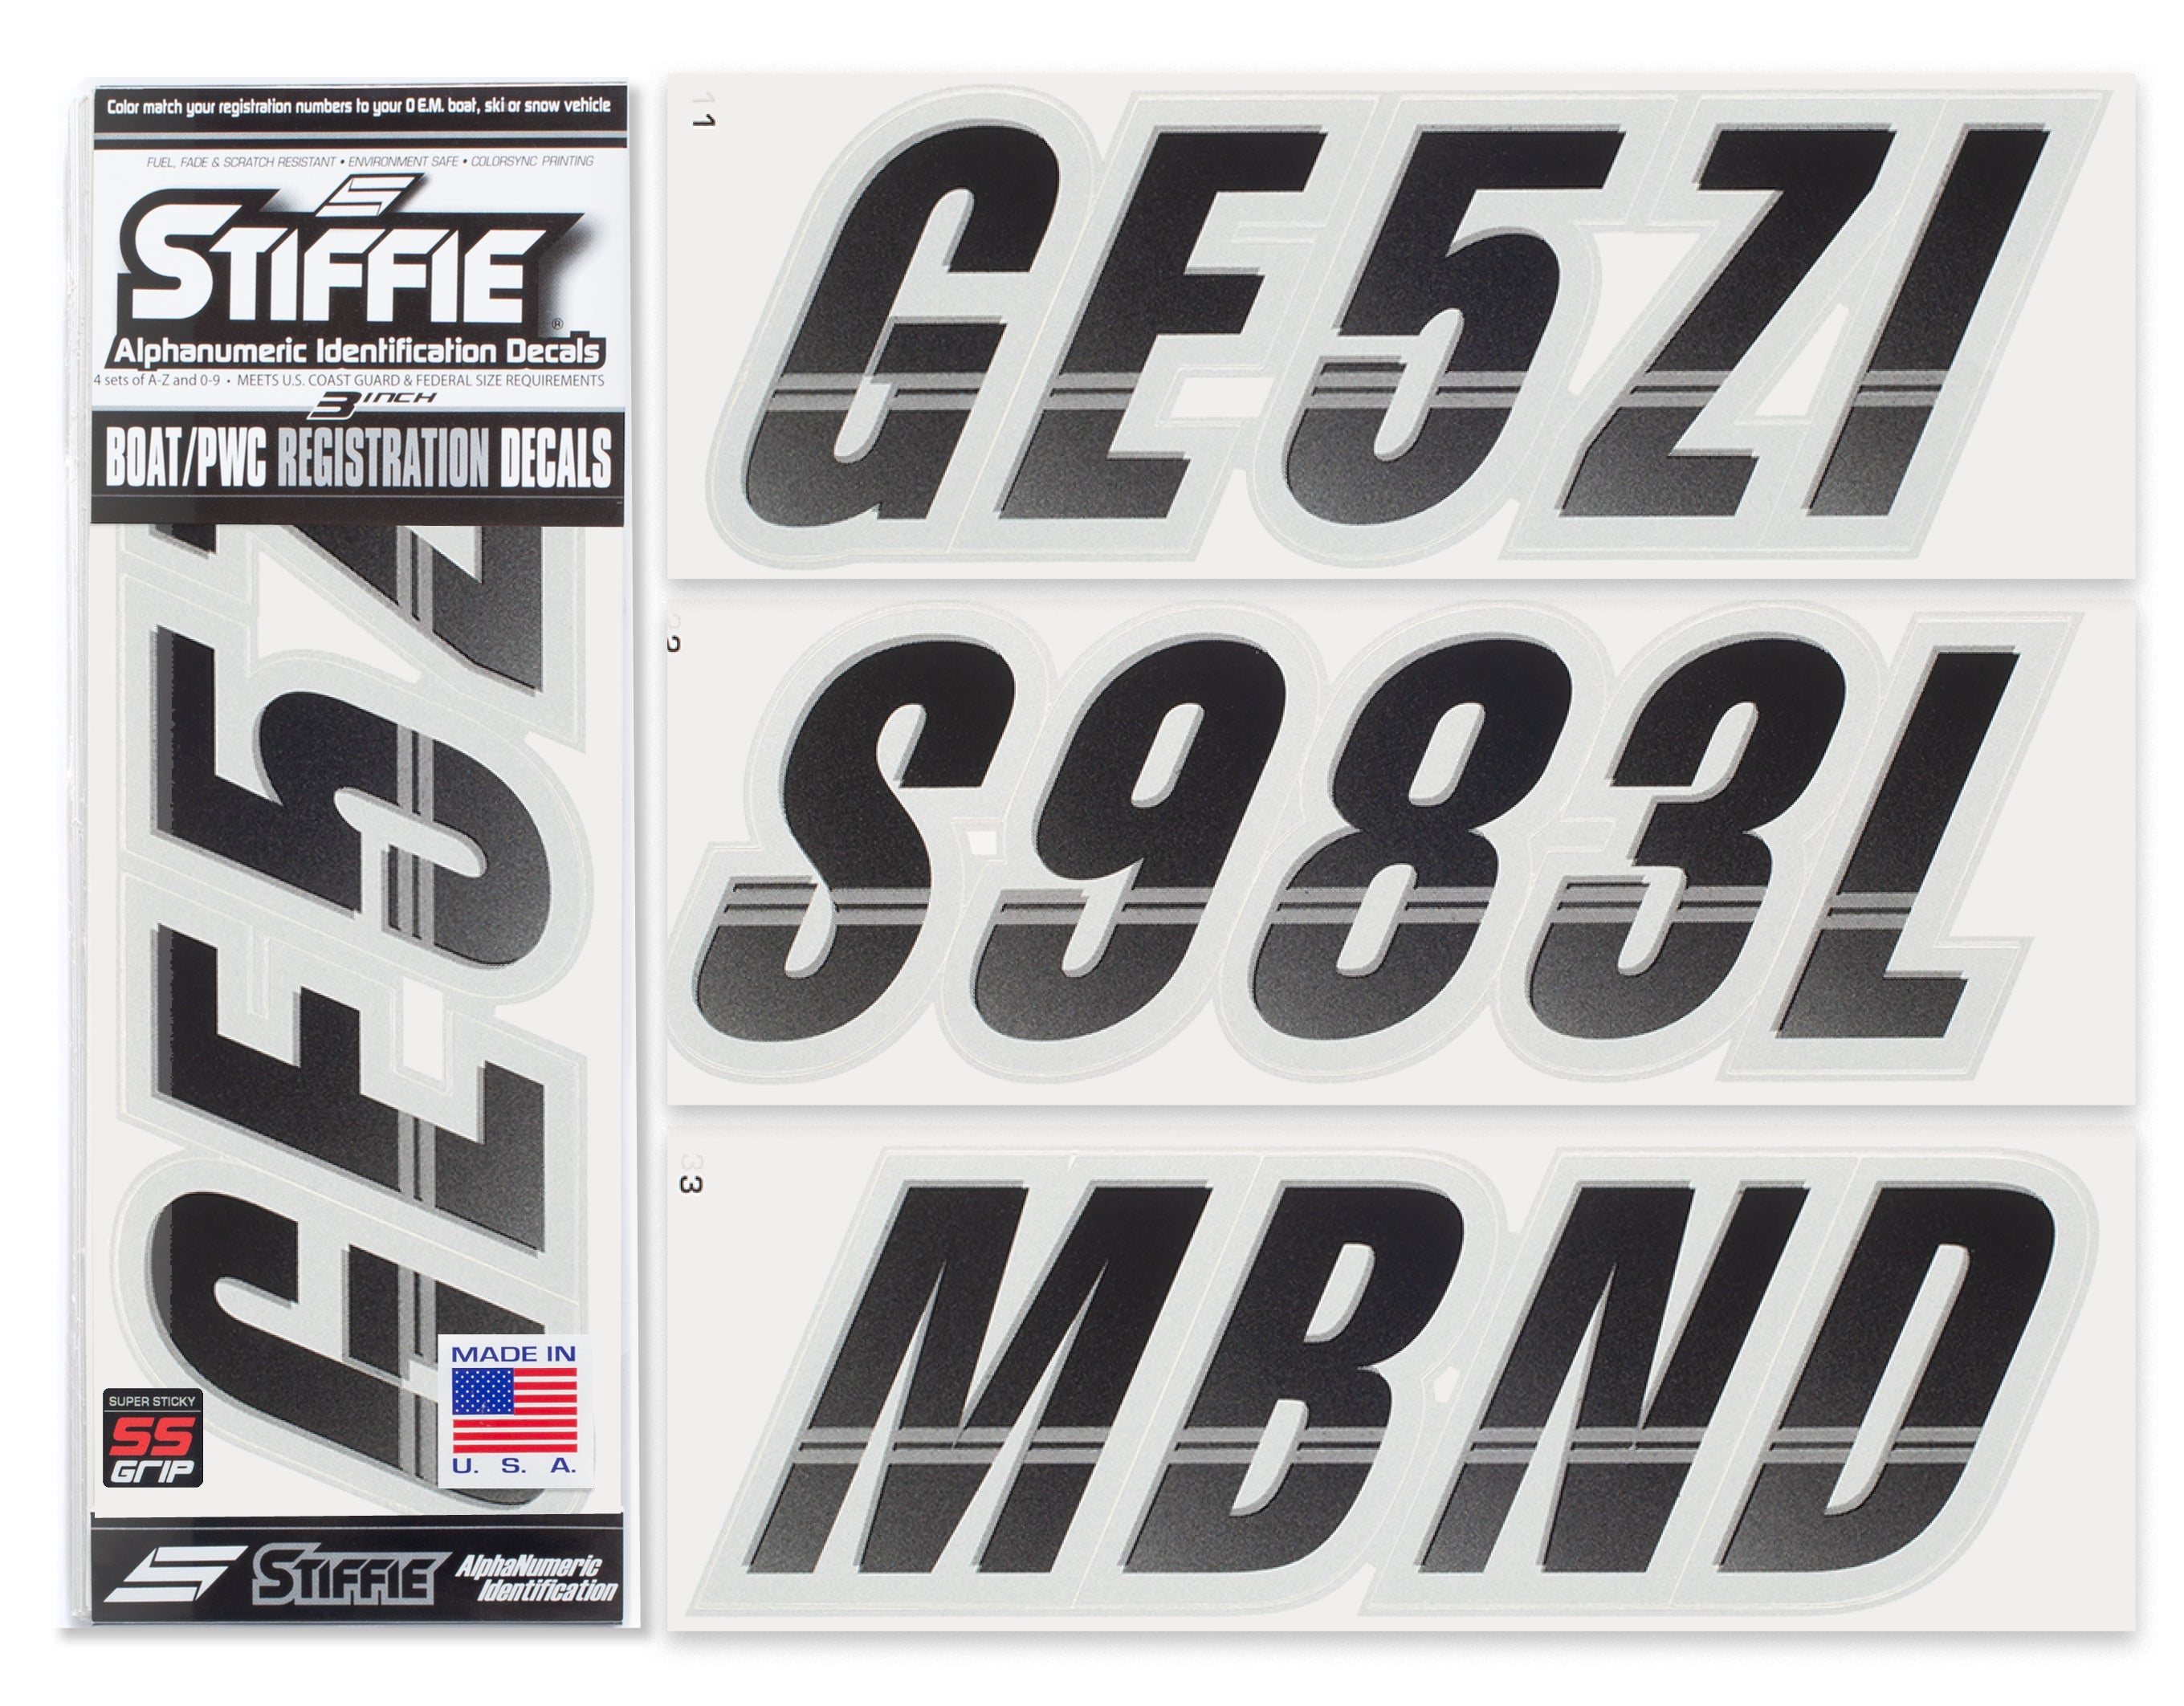 Techtron Black/Silver Super Sticky 3" Alpha Numeric Registration Identification Numbers Stickers Decals for Sea-Doo Spark, Inflatable Boats, Ribs, Hypalon/PVC, PWC and Boats.